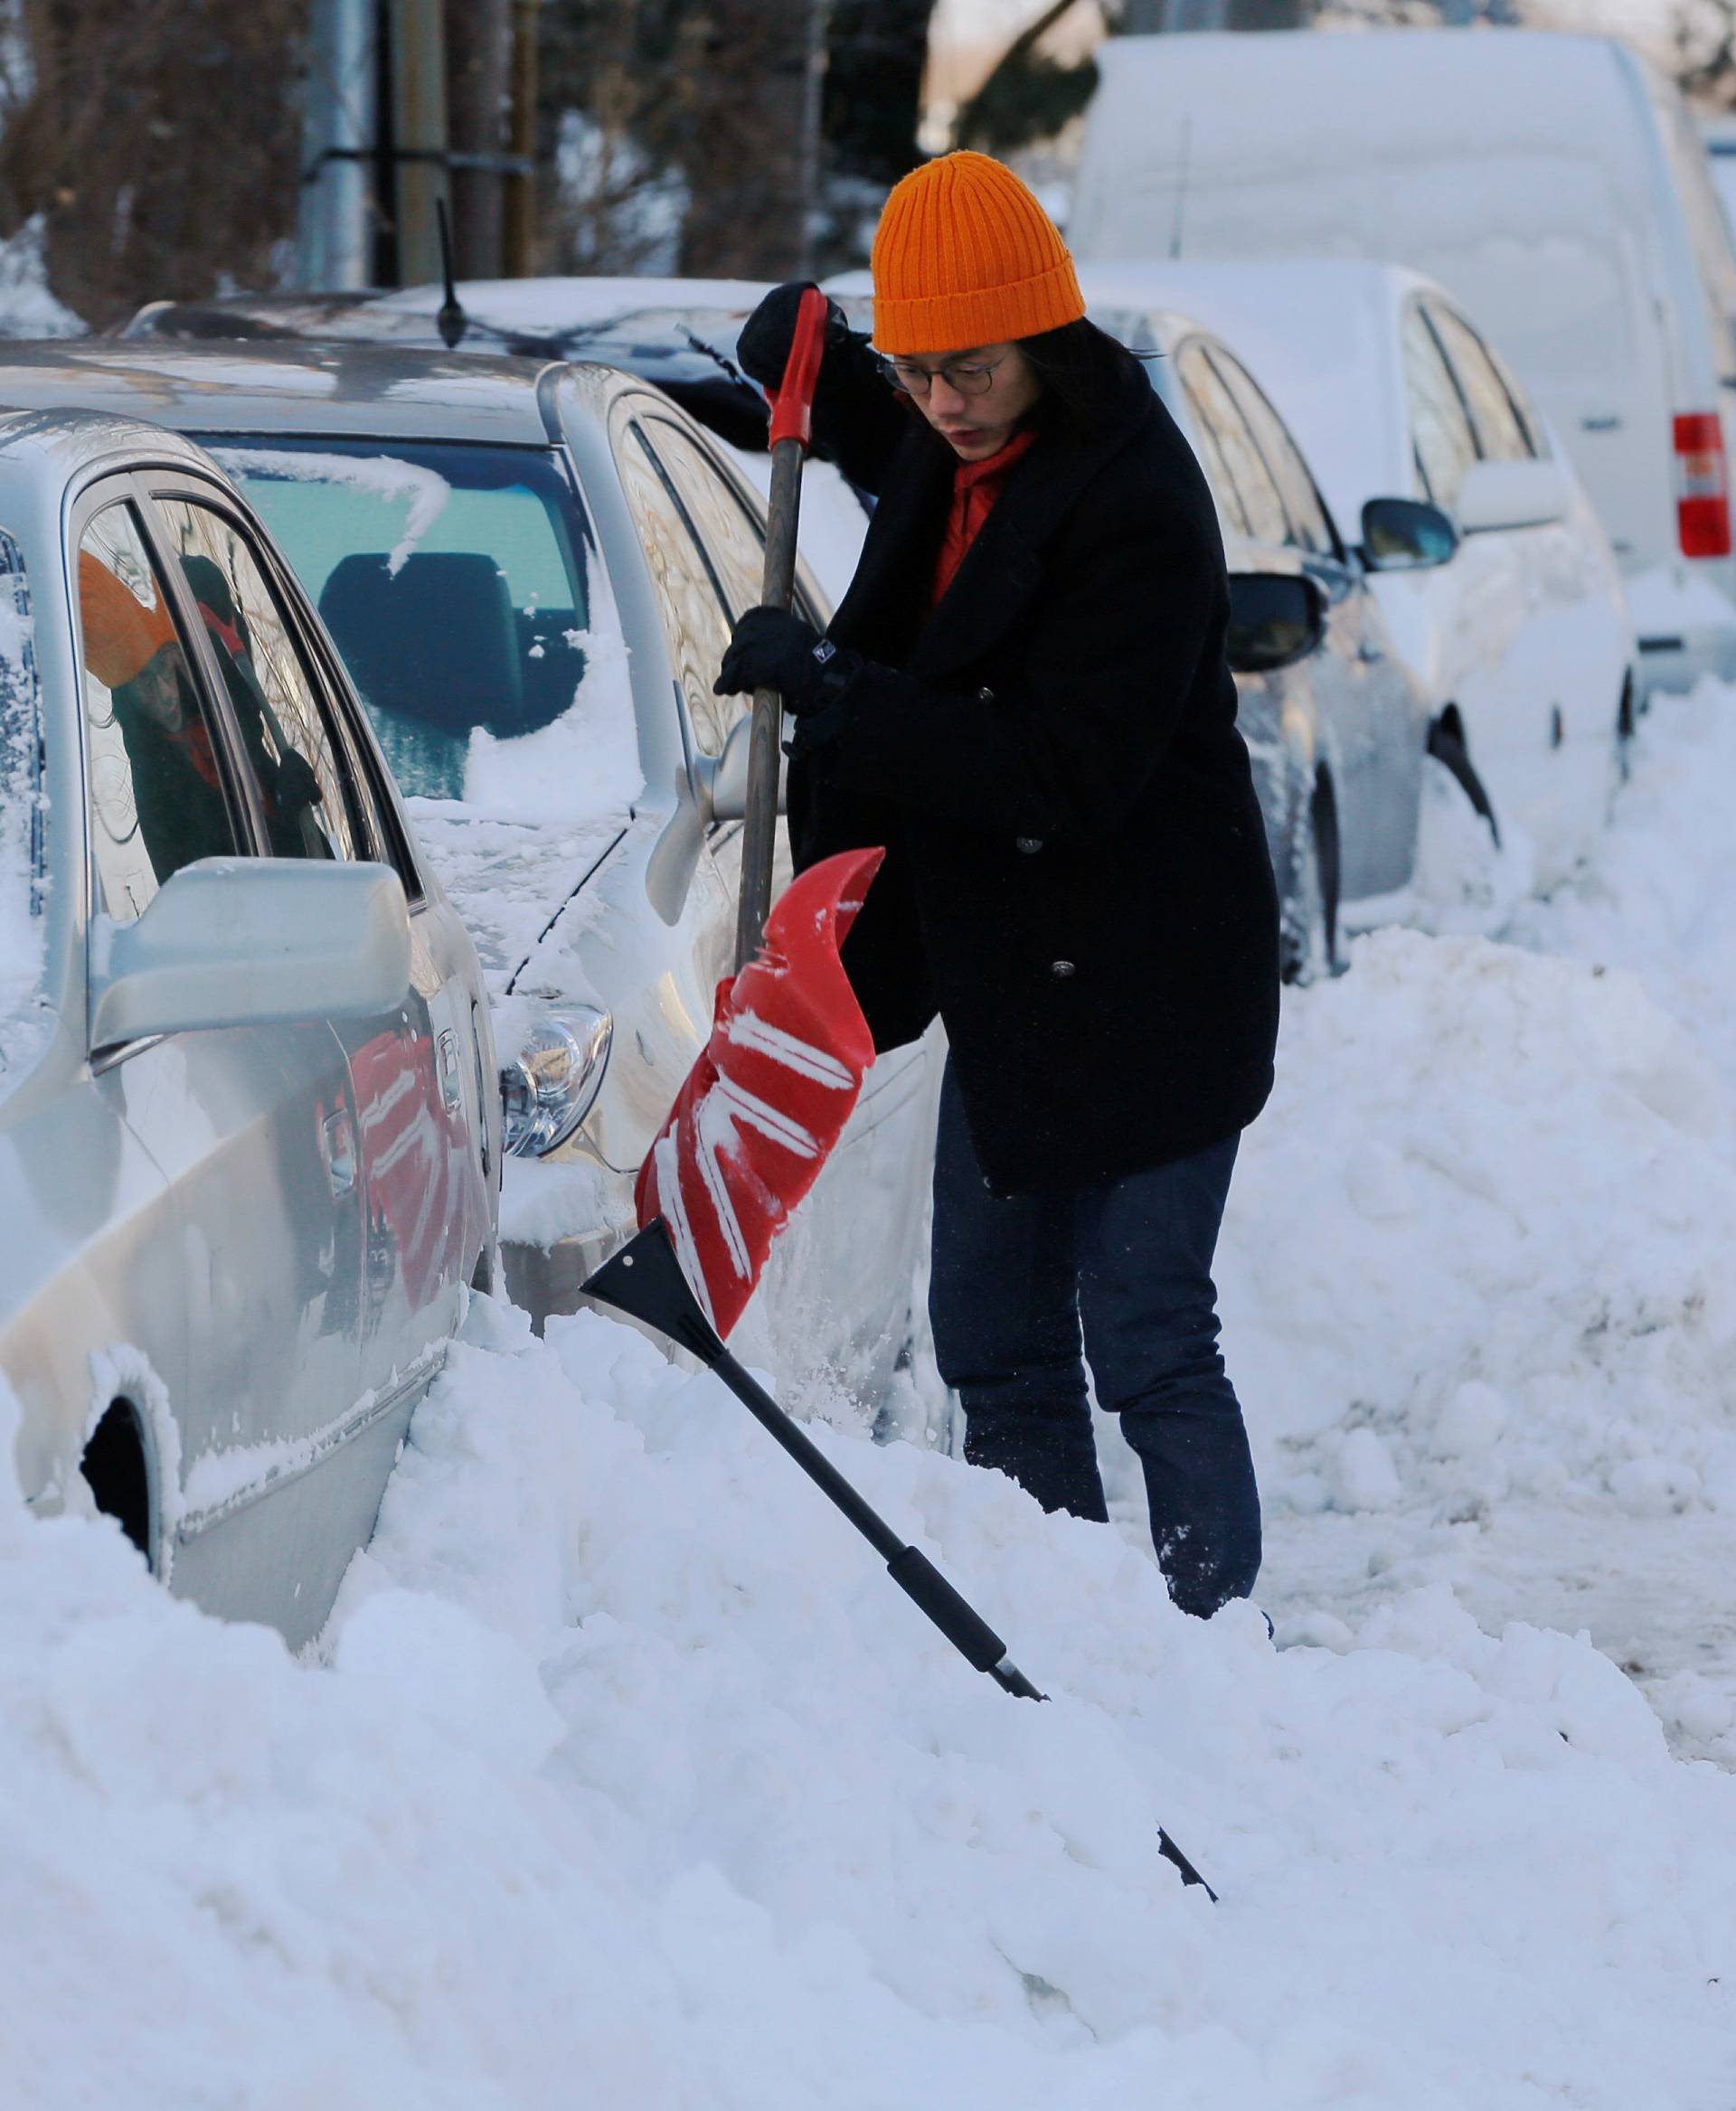 A woman digs out her car following winter snow storm Grayson in Boston